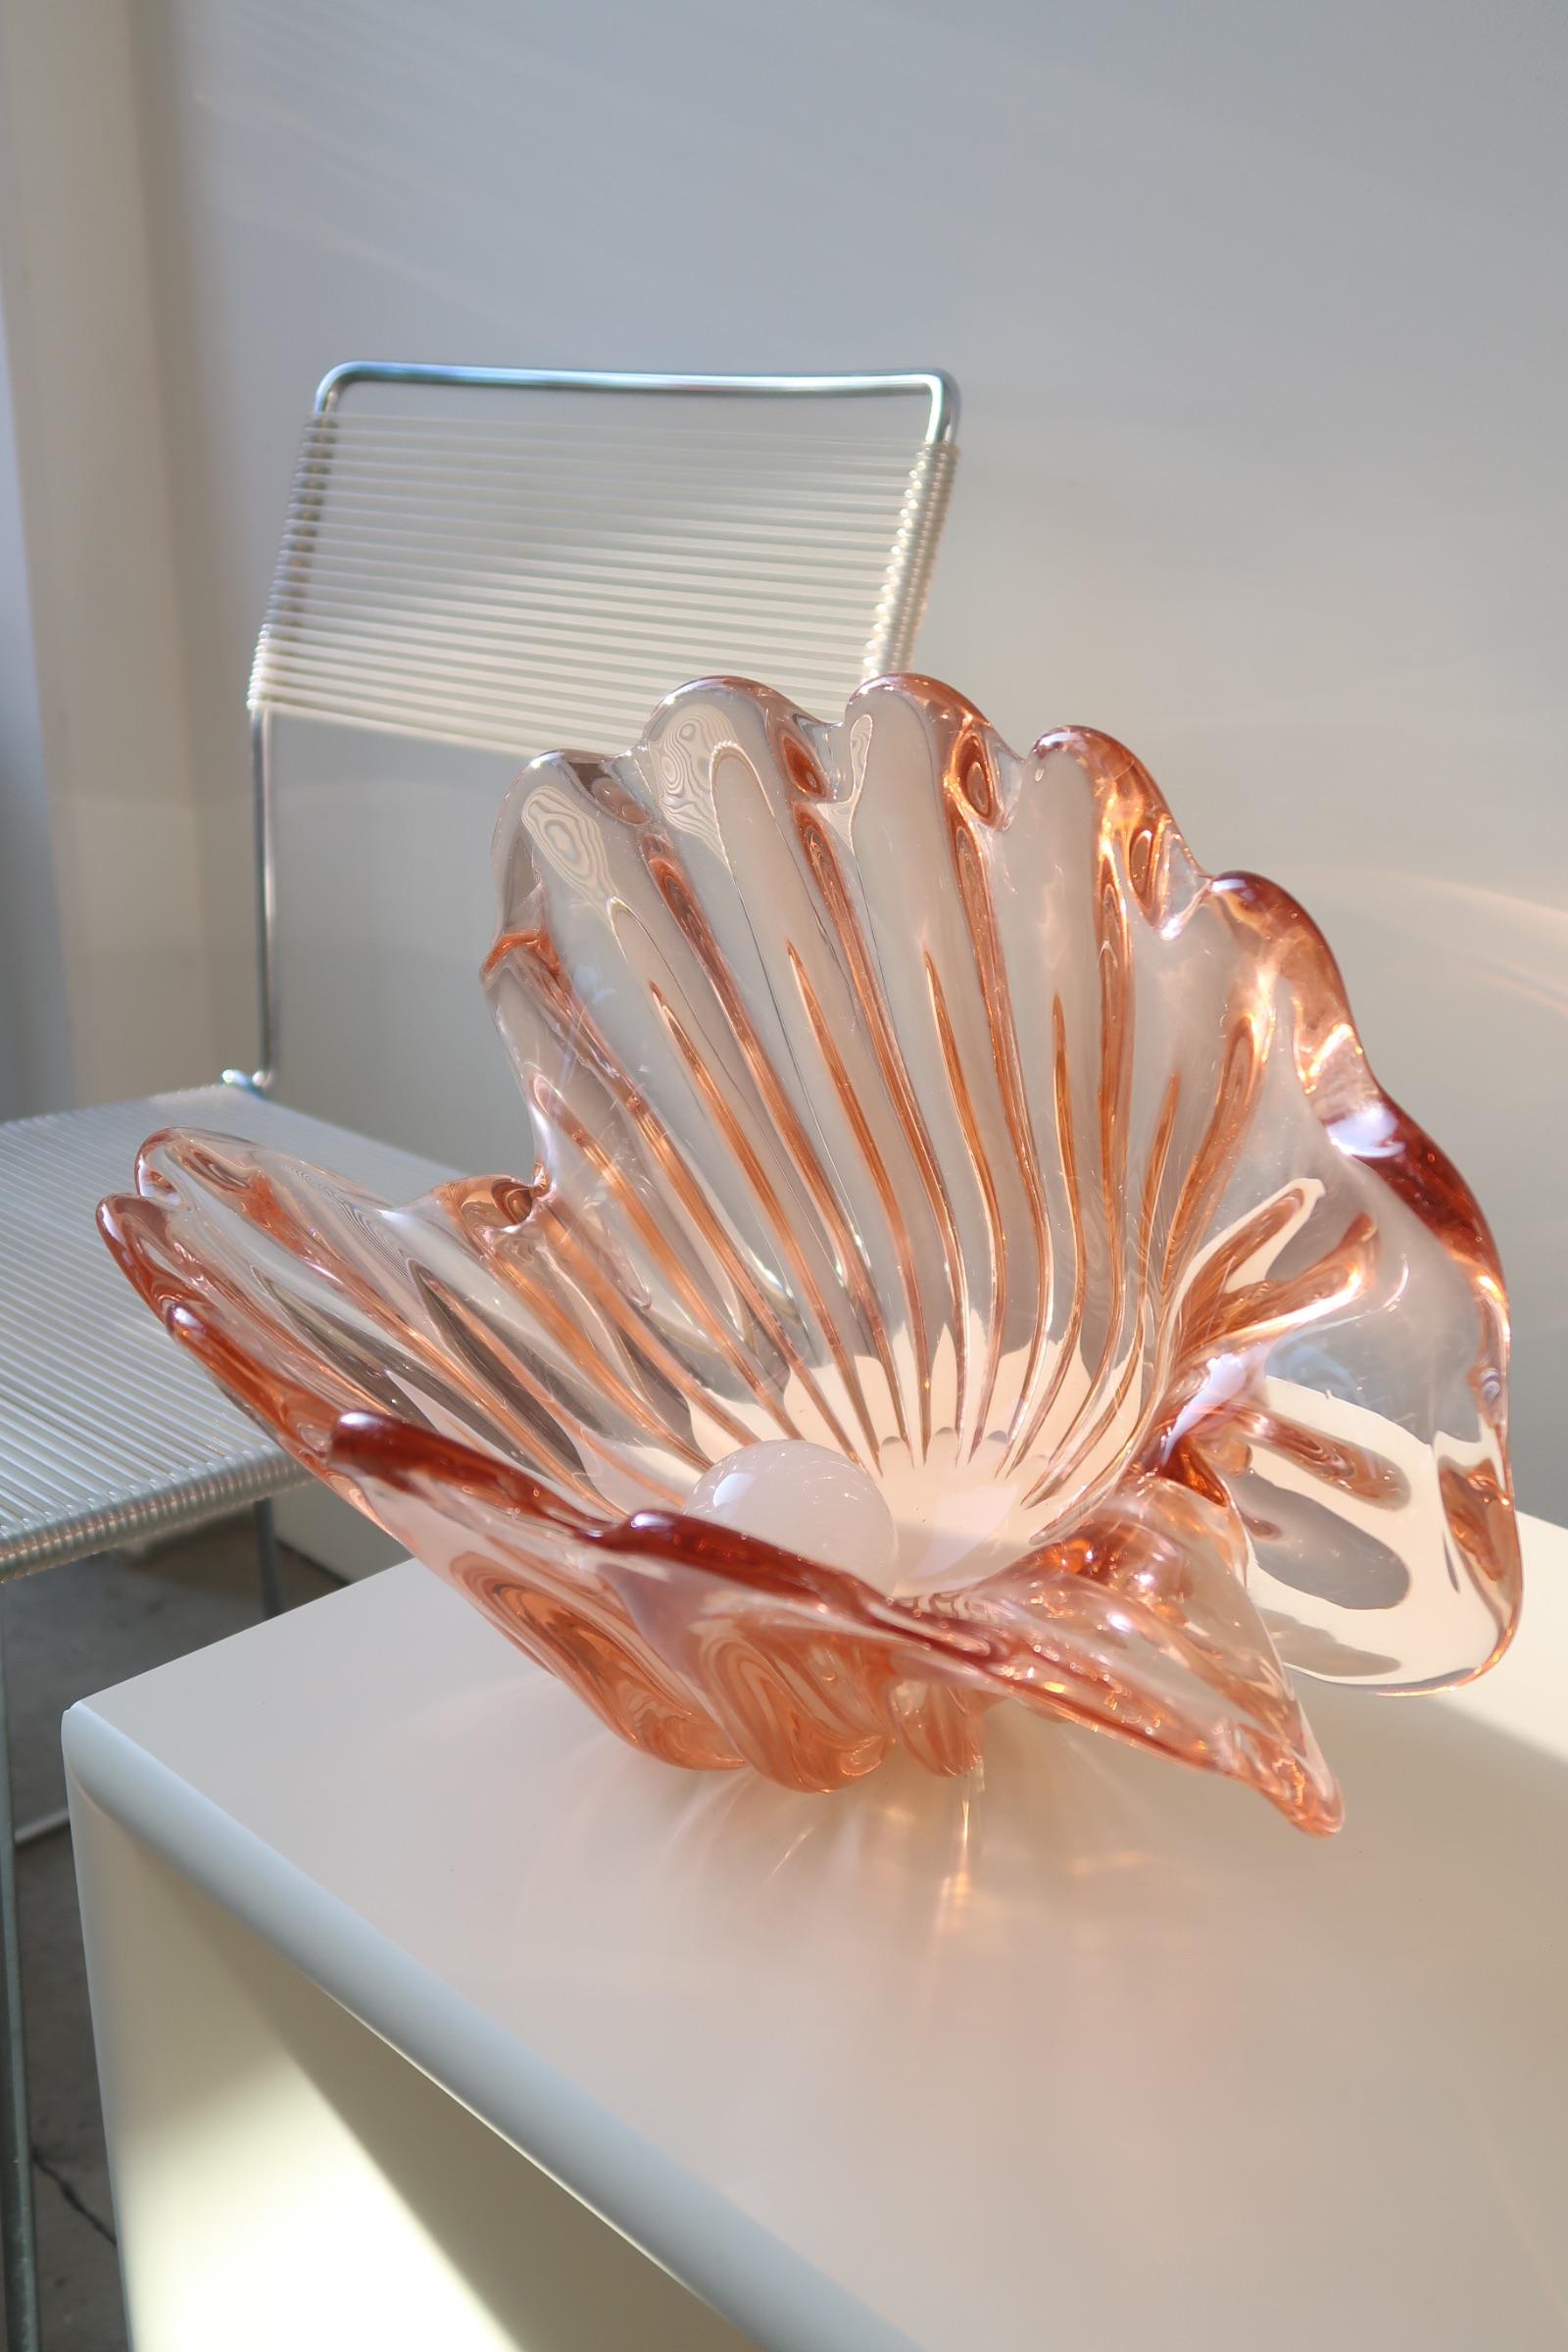 Vintage giant Murano shell clam bowl in transparent salmon colored glass with large white glass pearl. Both shell bowl and pearl are mouth blown. The shell has two bases and can either stand upright or tip on its side, the pearl itself lies loosely